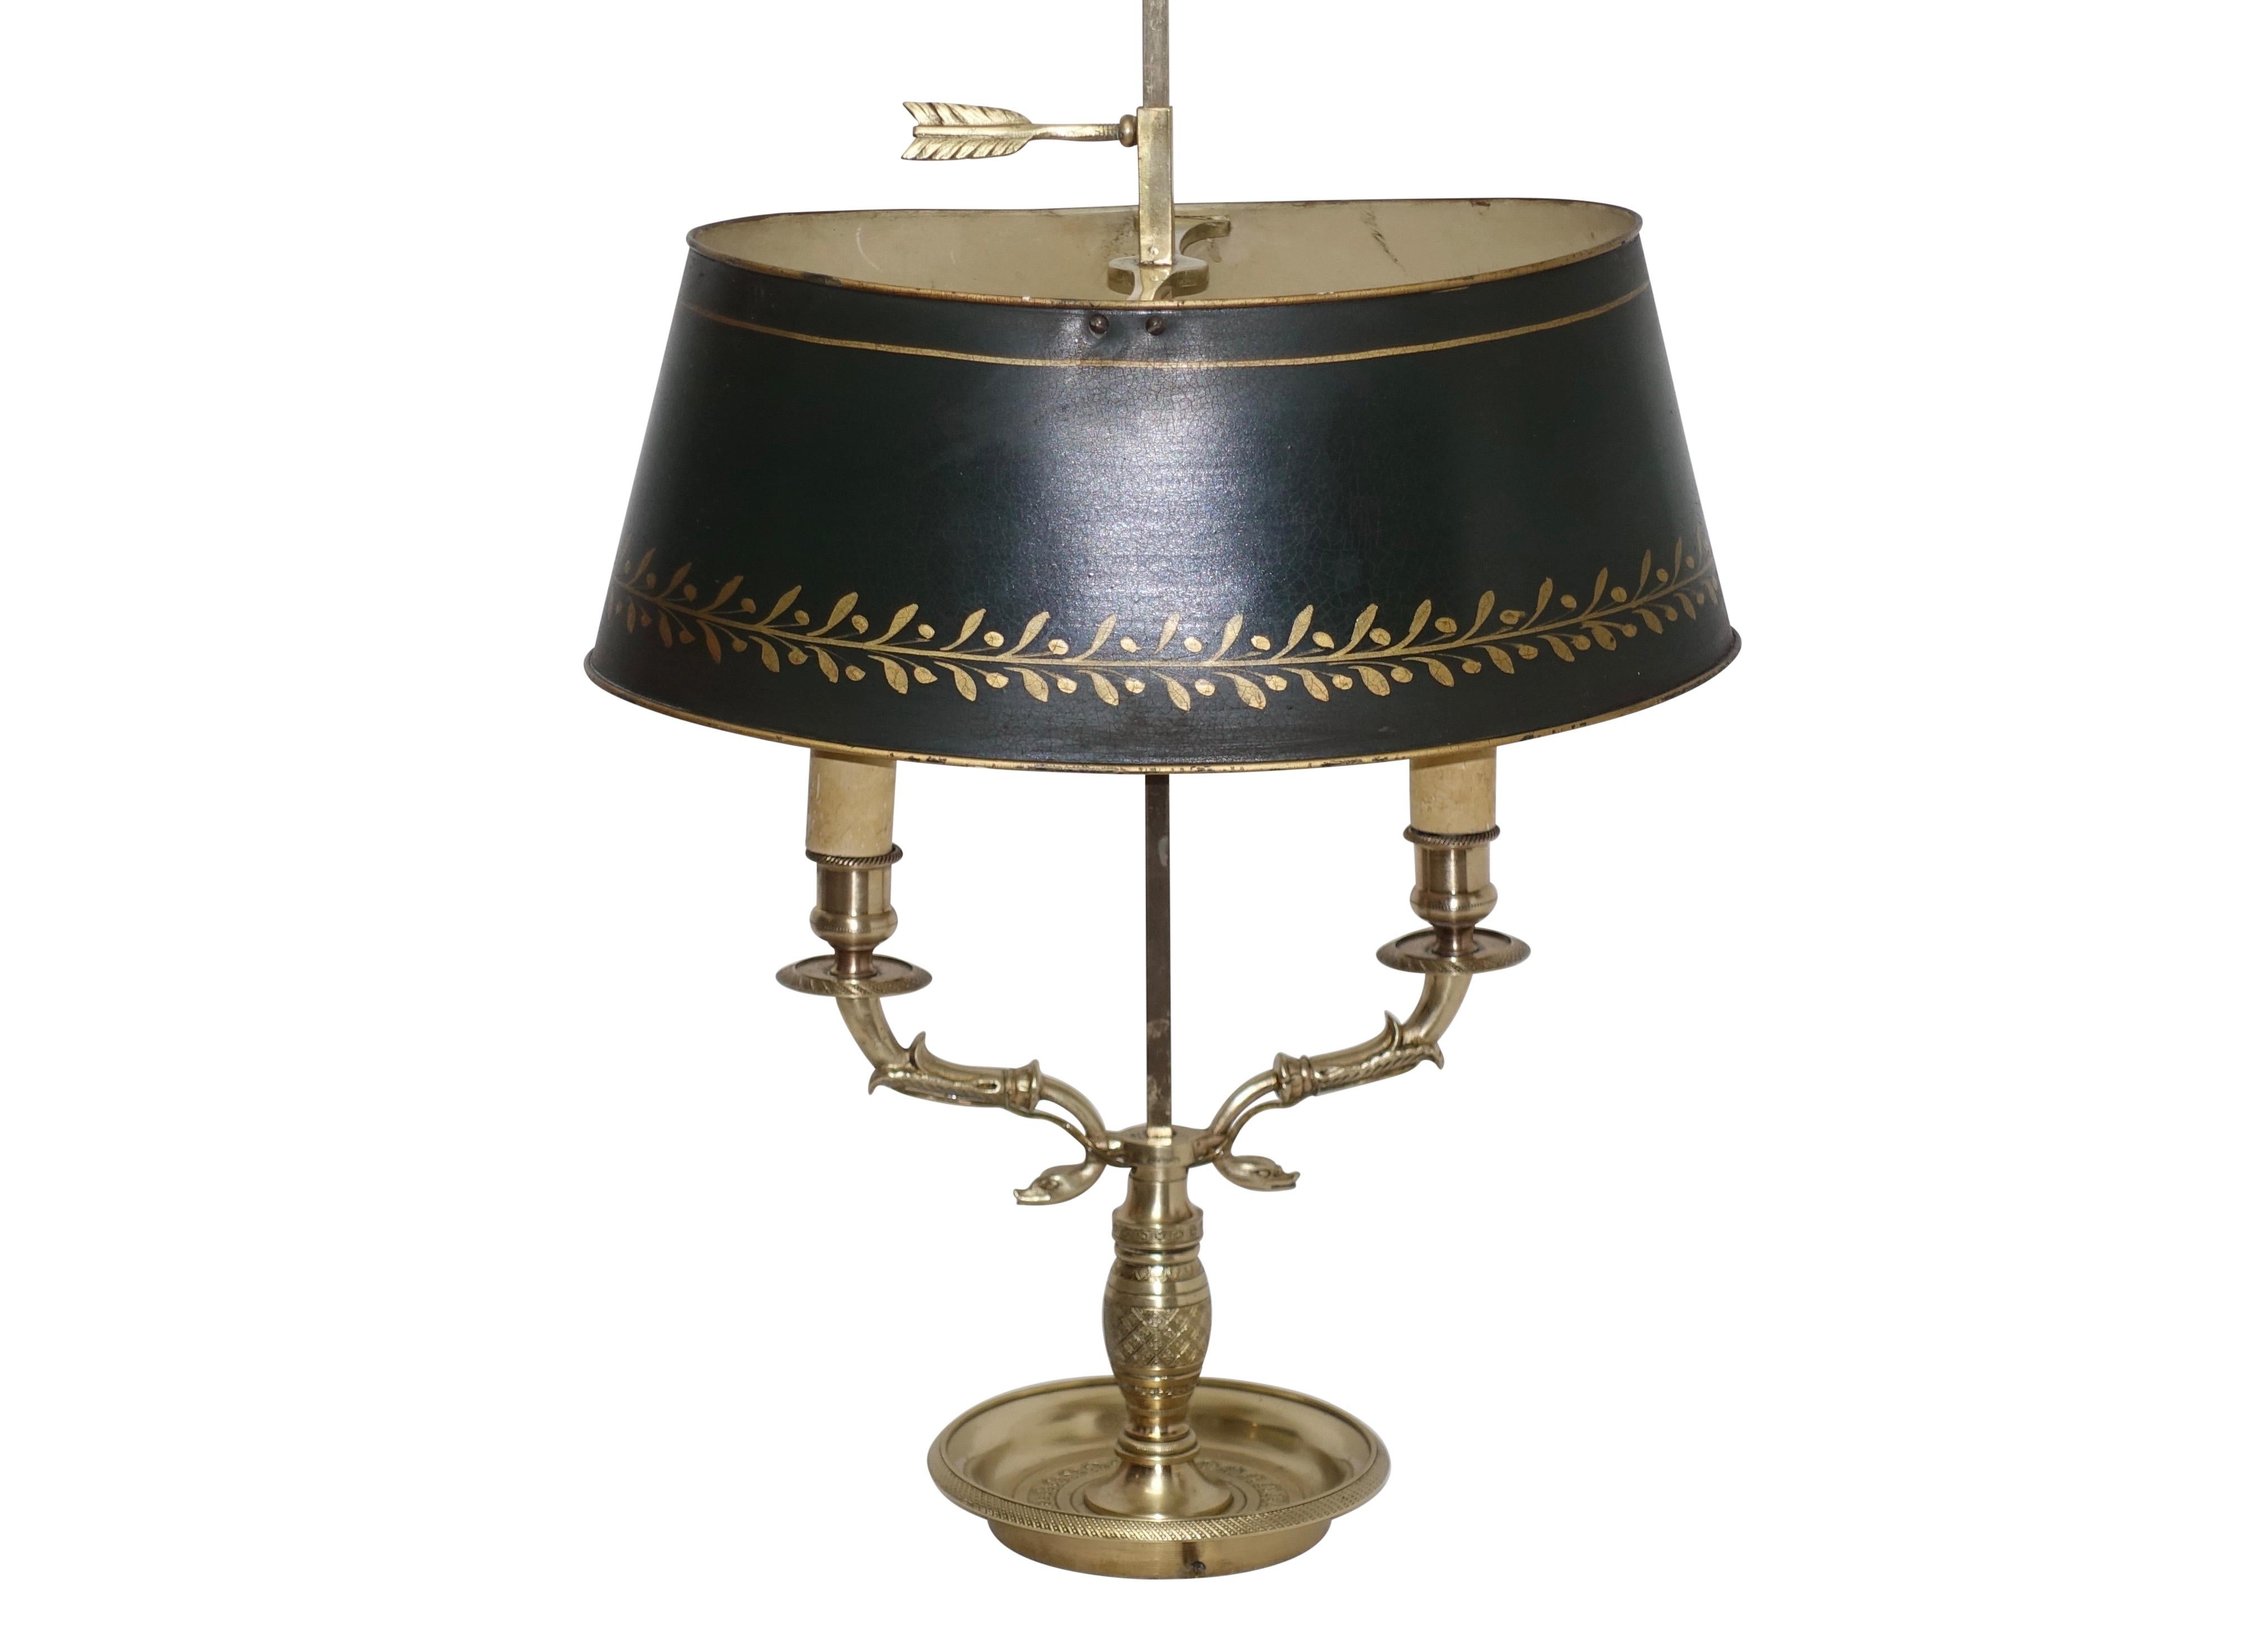 Gilt Brass Swan Neck Bouillotte Lamp with Tole Shade, French, 19th Century